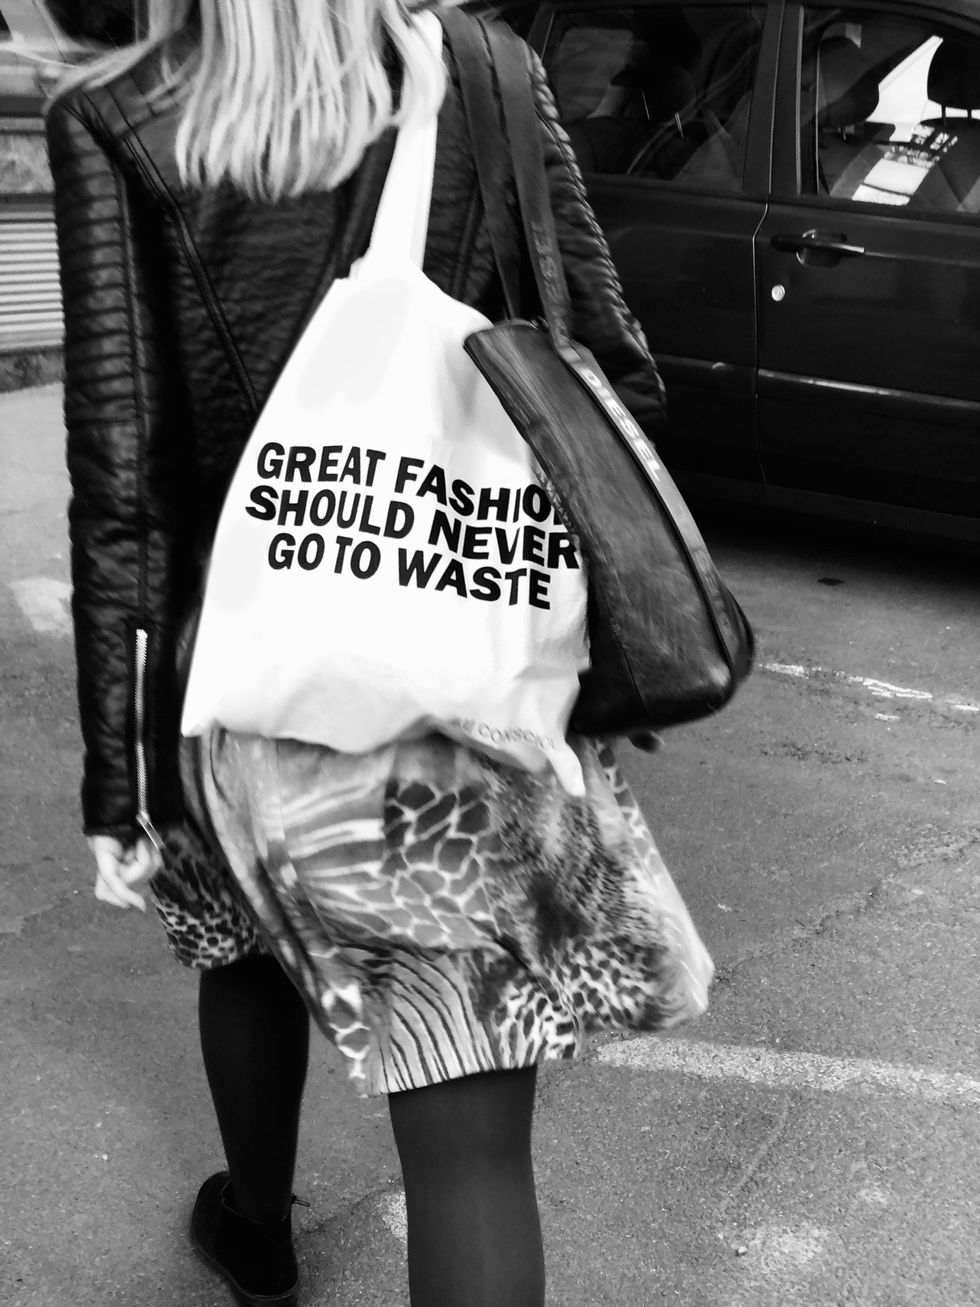 https://www.pexels.com/photo/grayscale-photography-of-woman-carrying-a-bag-2097472/